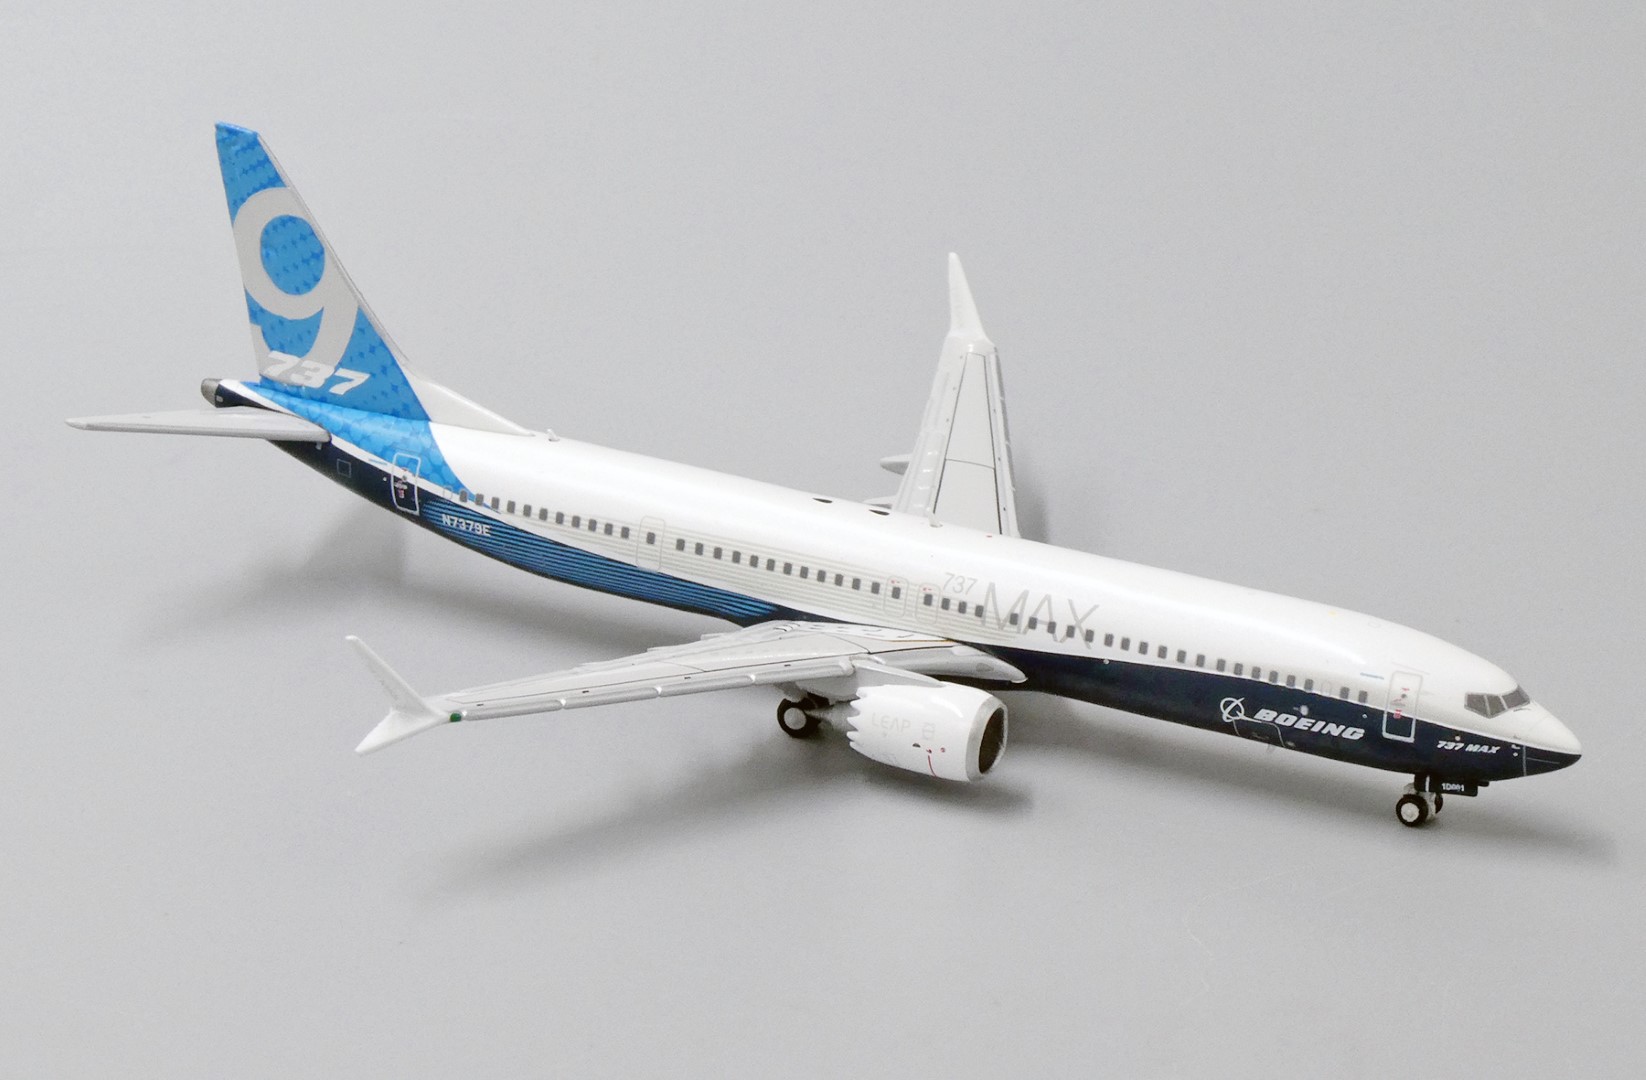 Details about   JCWINGS JCLH4133 1/400 BOEING 737-9 MAX HOUSE COLOR REG N7379E WITH ANTENNA 